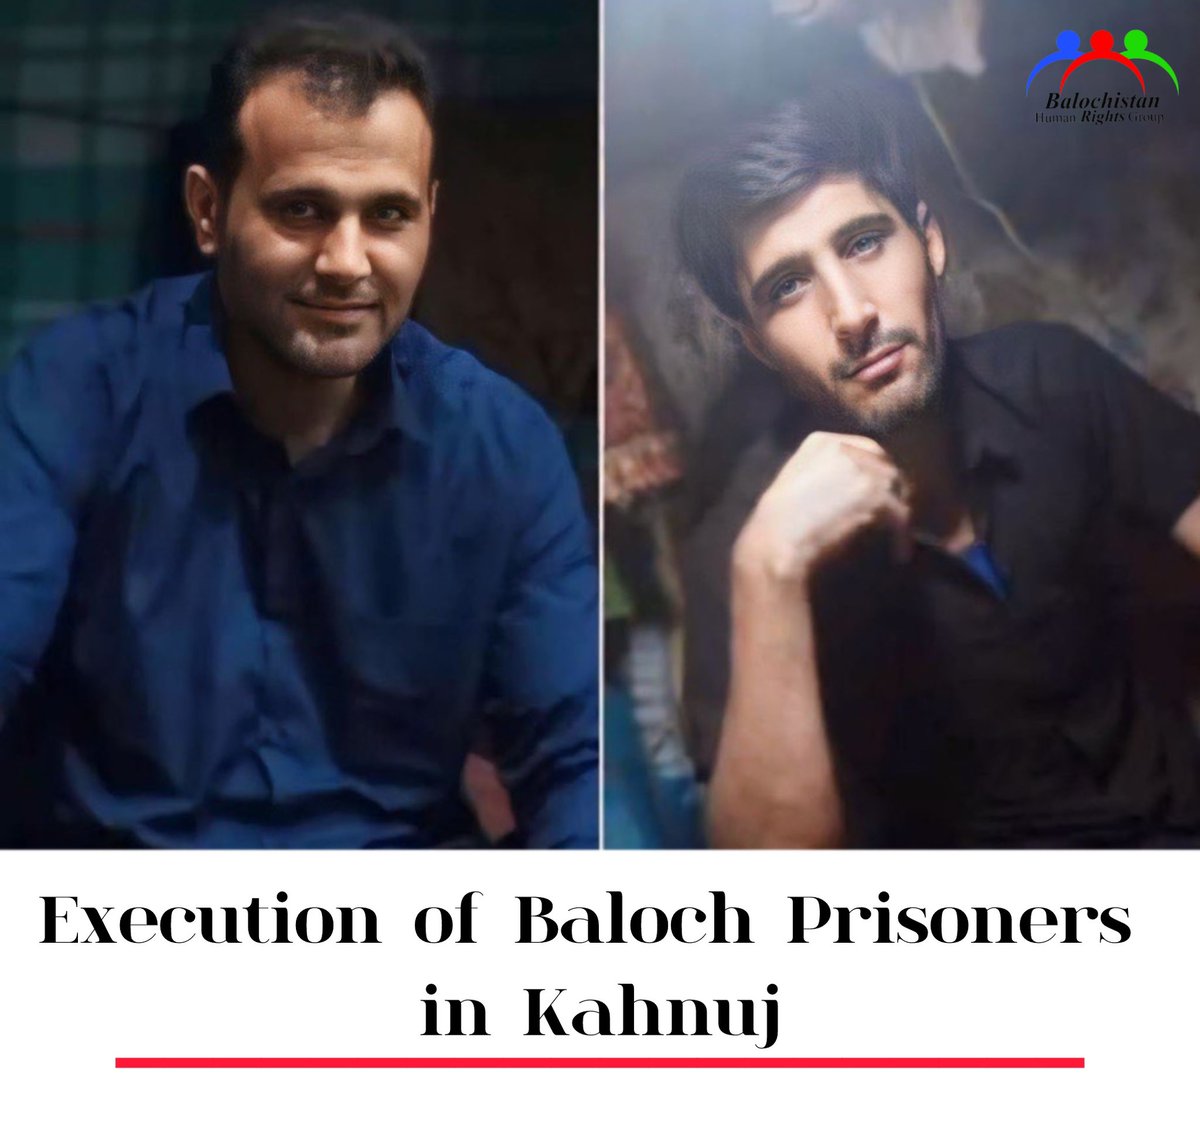 Two #Baloch prisoners #executed in Kahnuj prison without family notification. Abdullah Uzbakzehi and Khalilullah Barahui sentenced to death for drug charges. In 2023, 184 Baloch prisoners executed across Iran, highlighting Zahedan and Birjand prisons as hotspots.…